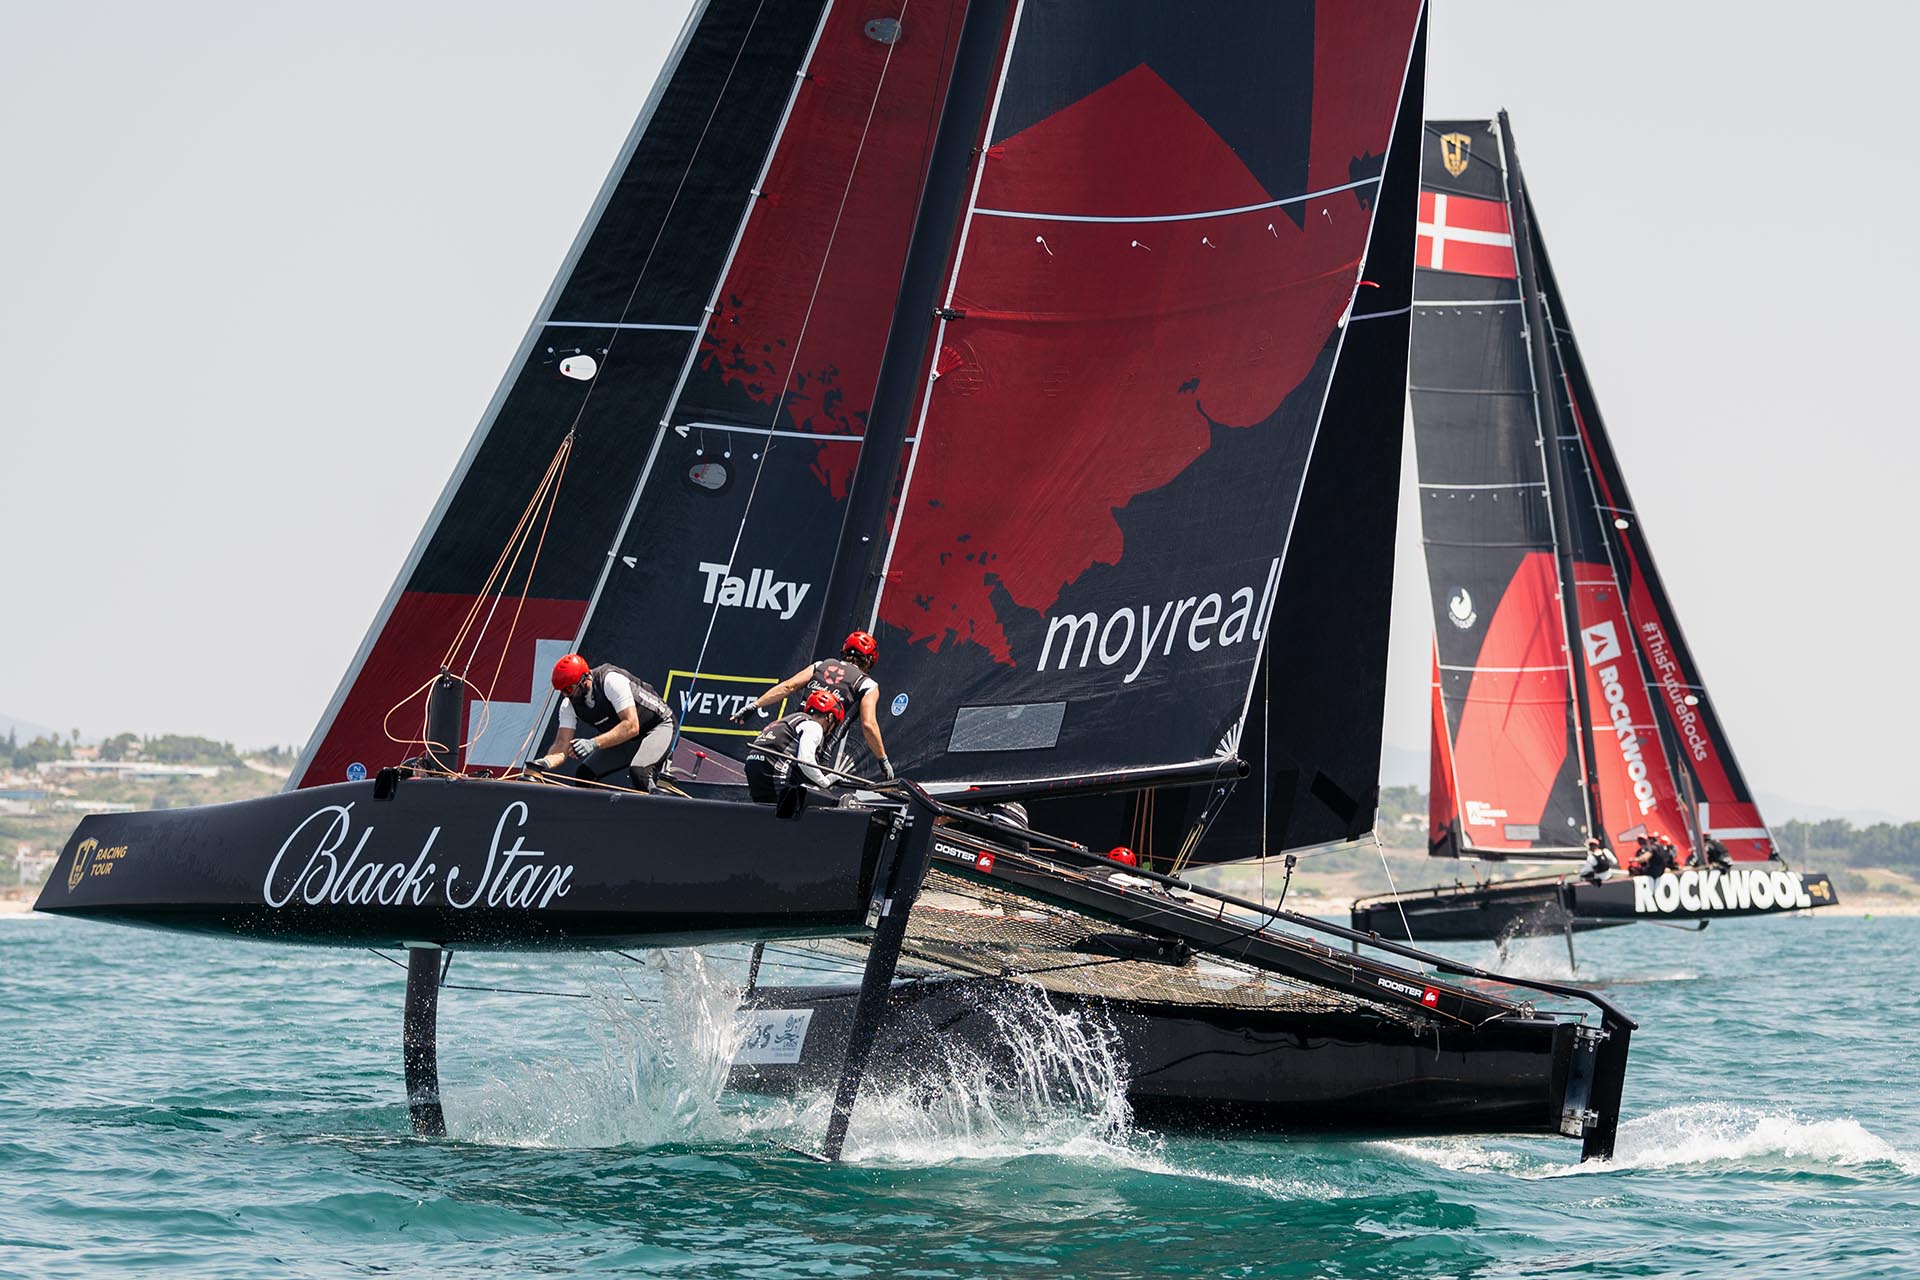 After being distanced by a well-rehearsed Team Rockwool in strong winds, the Black Star Sailing Team ...